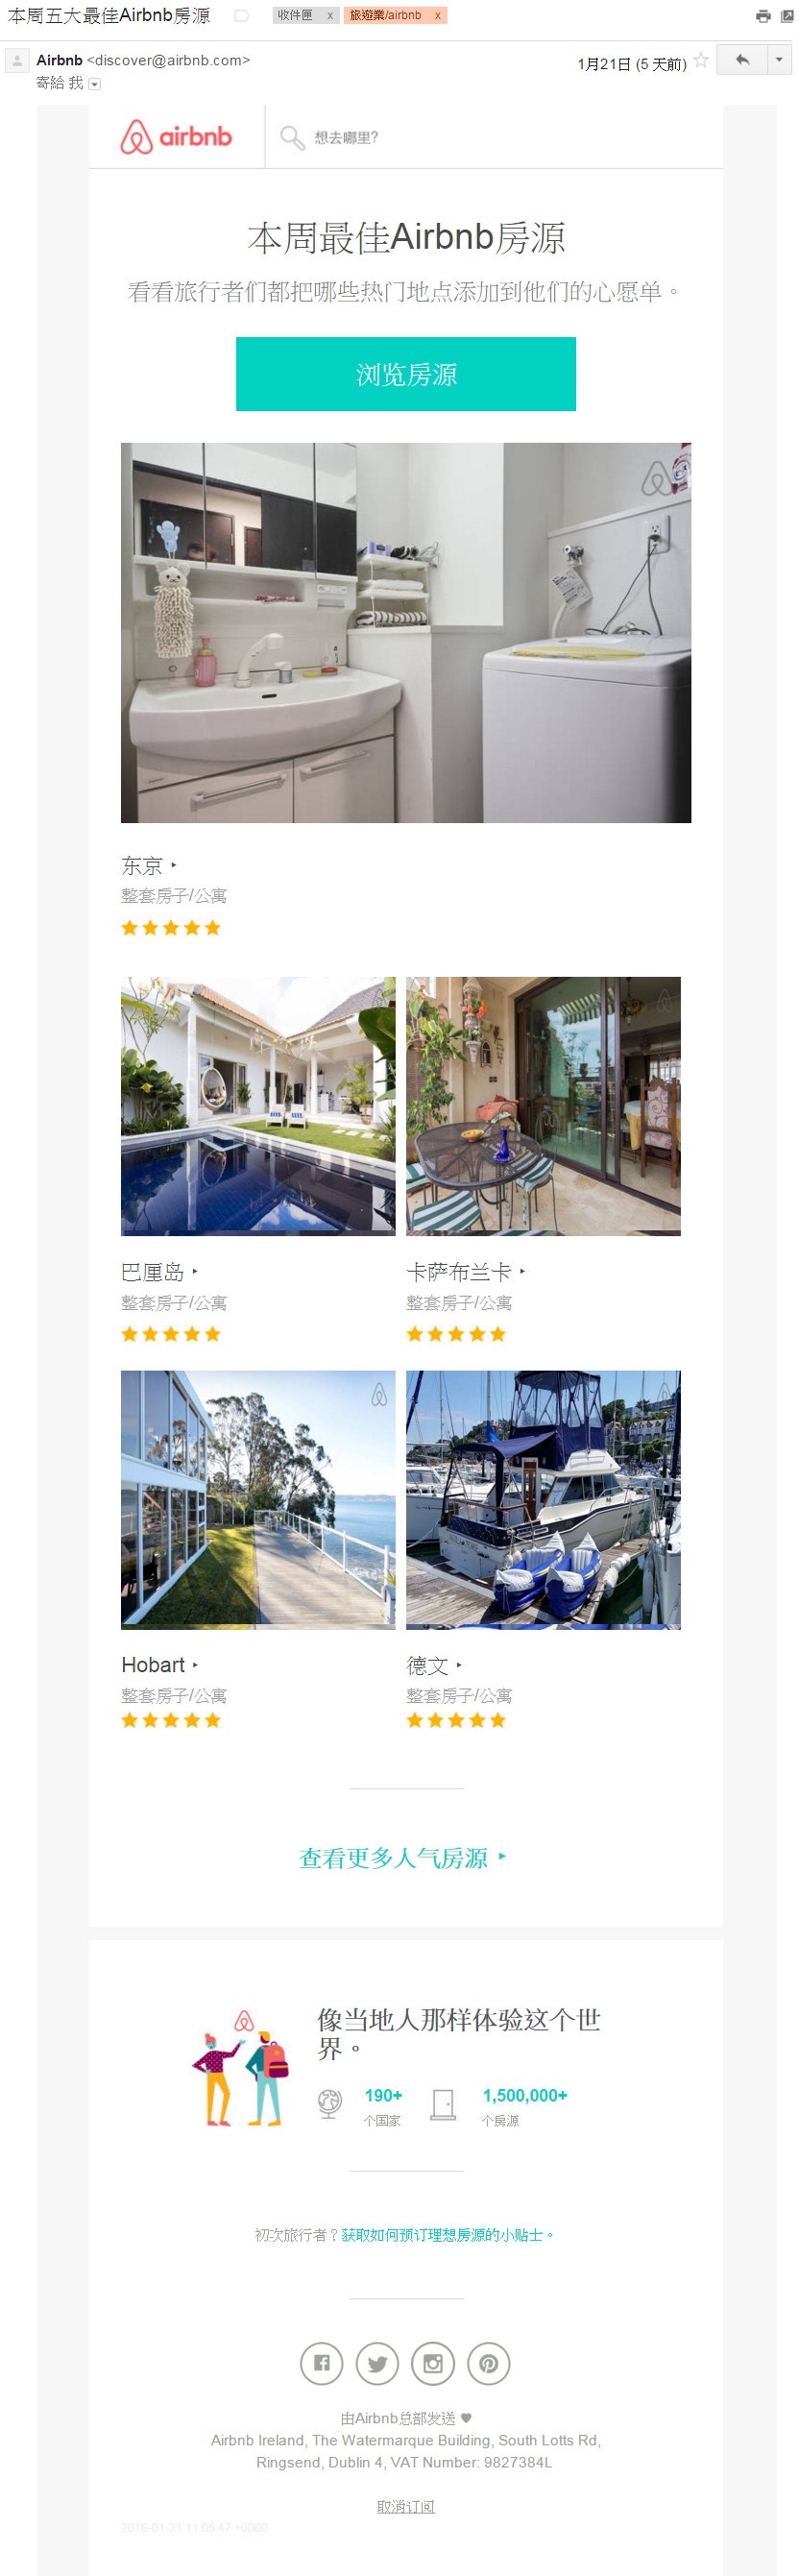 airbnb_discover